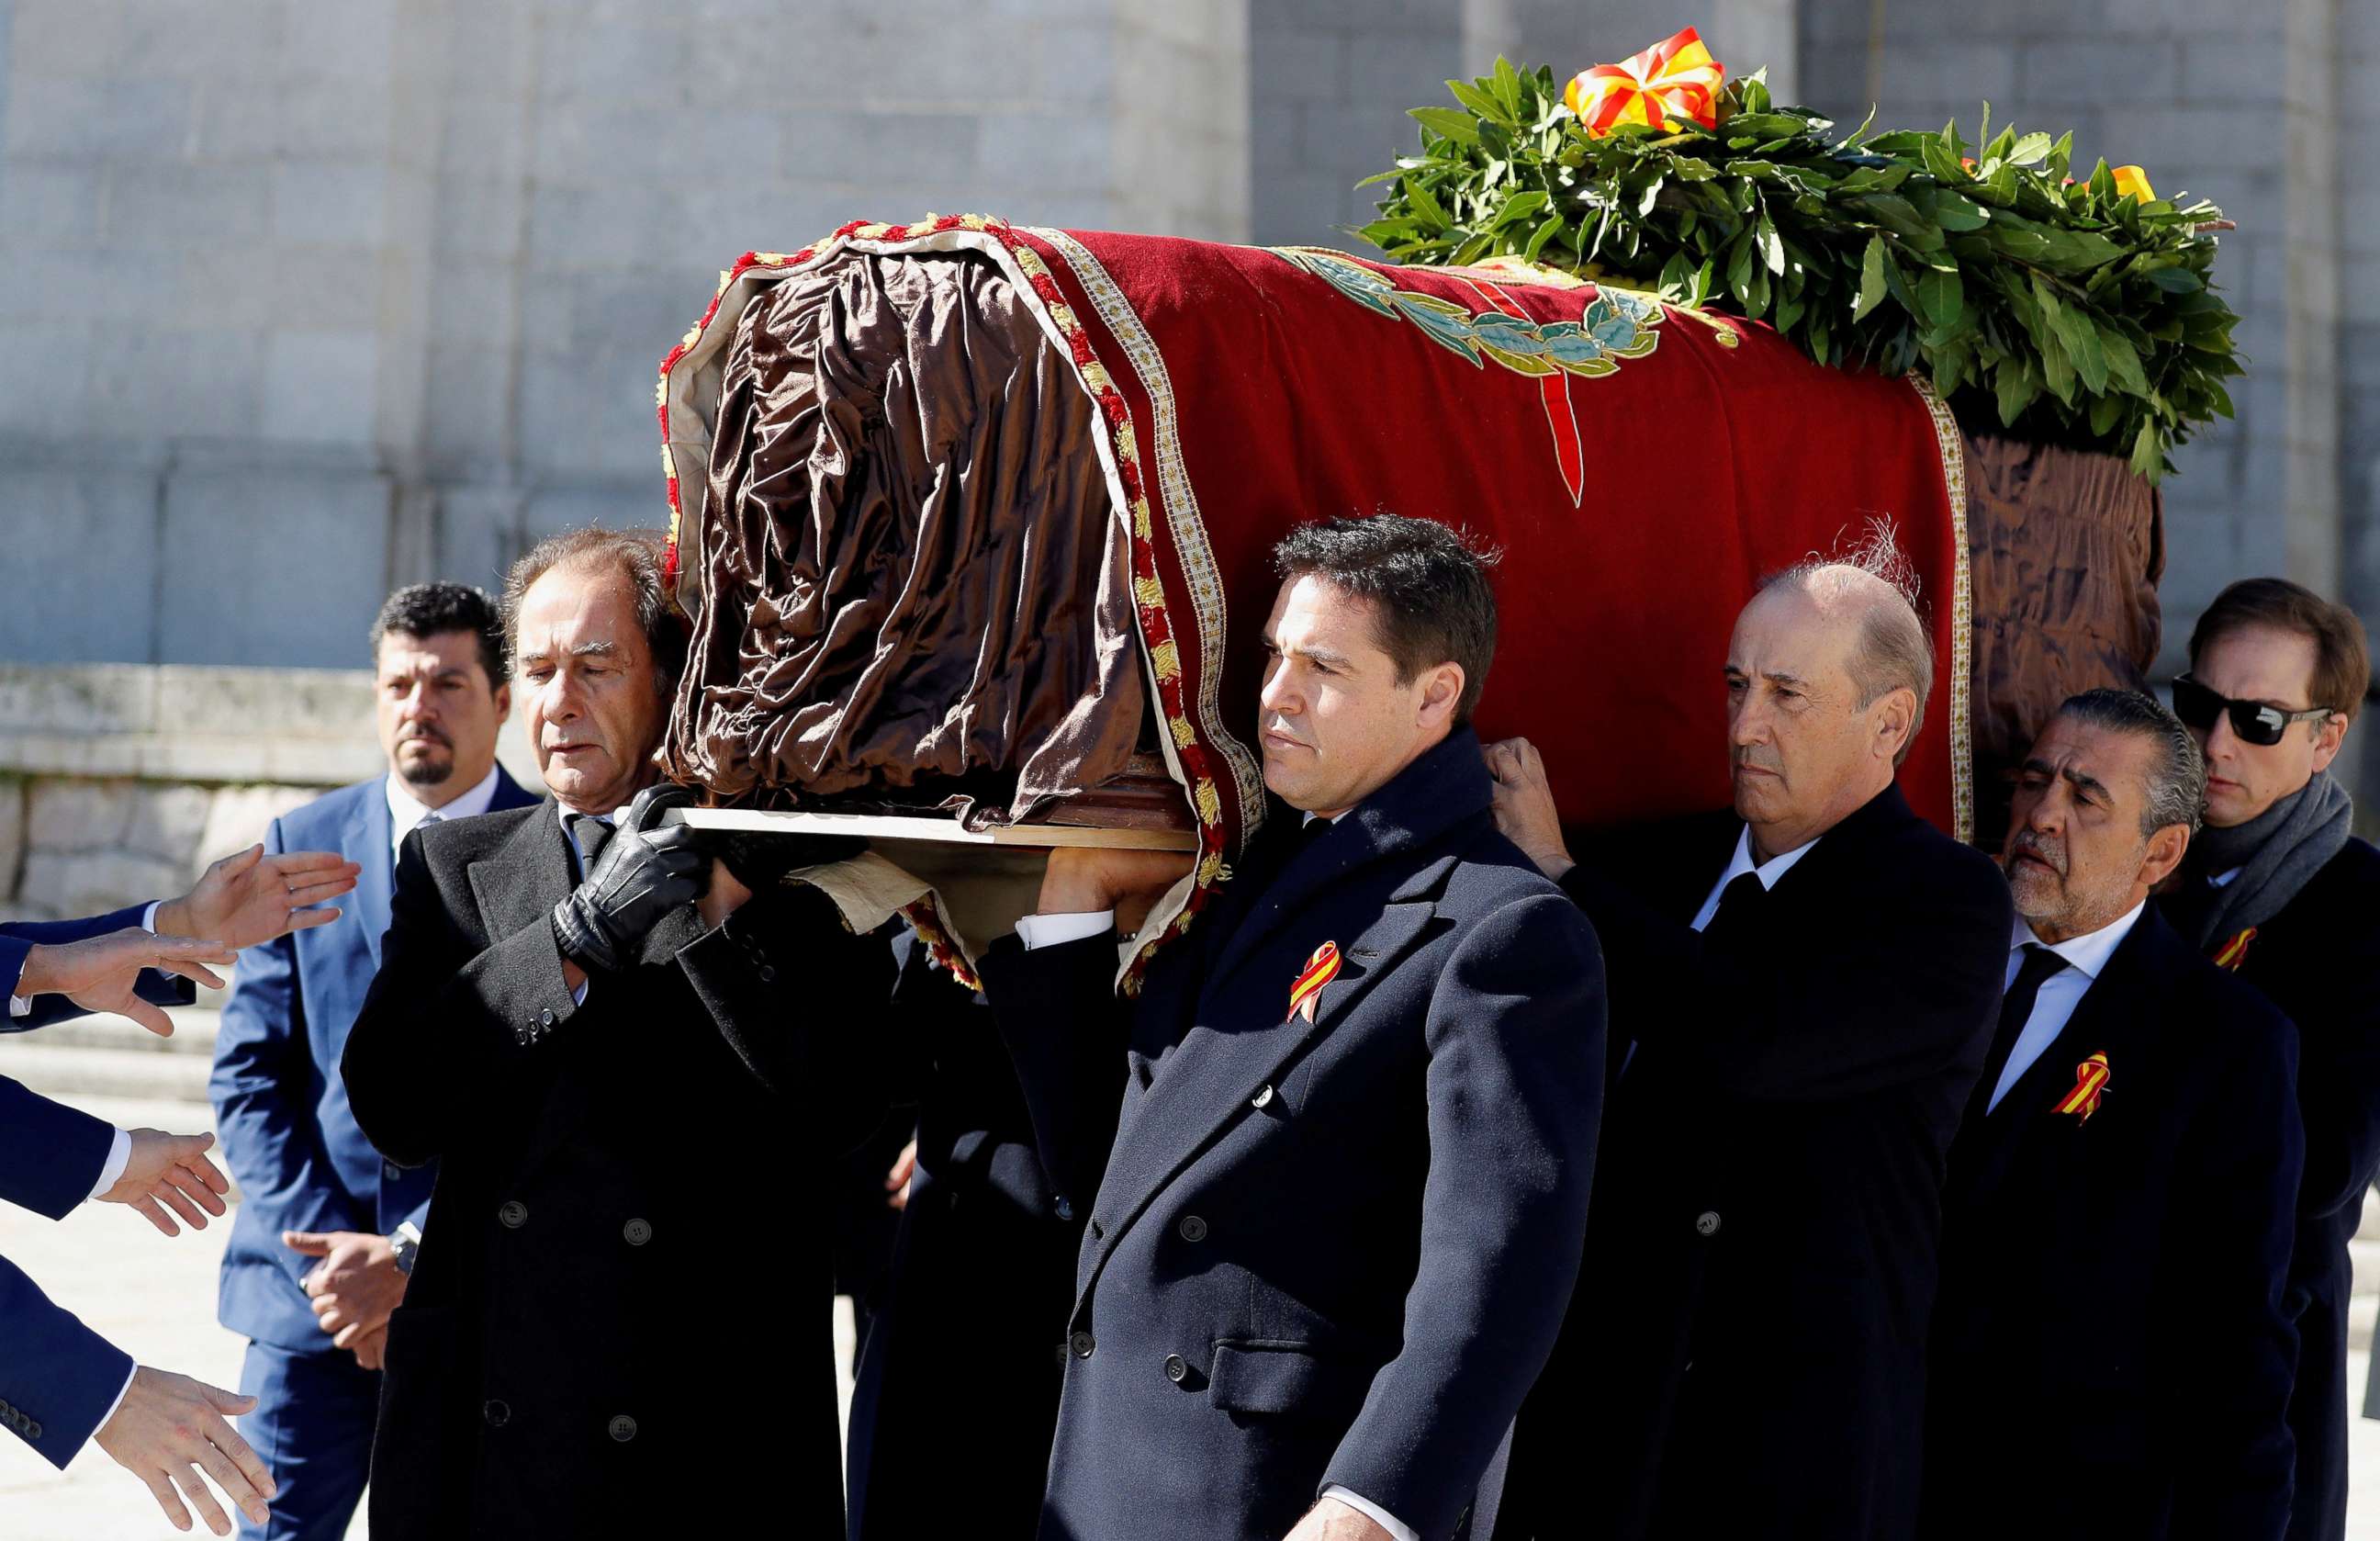 PHOTO: Late Spanish dictator Francisco Franco's relatives carry his coffin out of the Basilica of The Valle de los Caidos in San Lorenzo de El Escorial, Spain, Oct. 24, 2019.